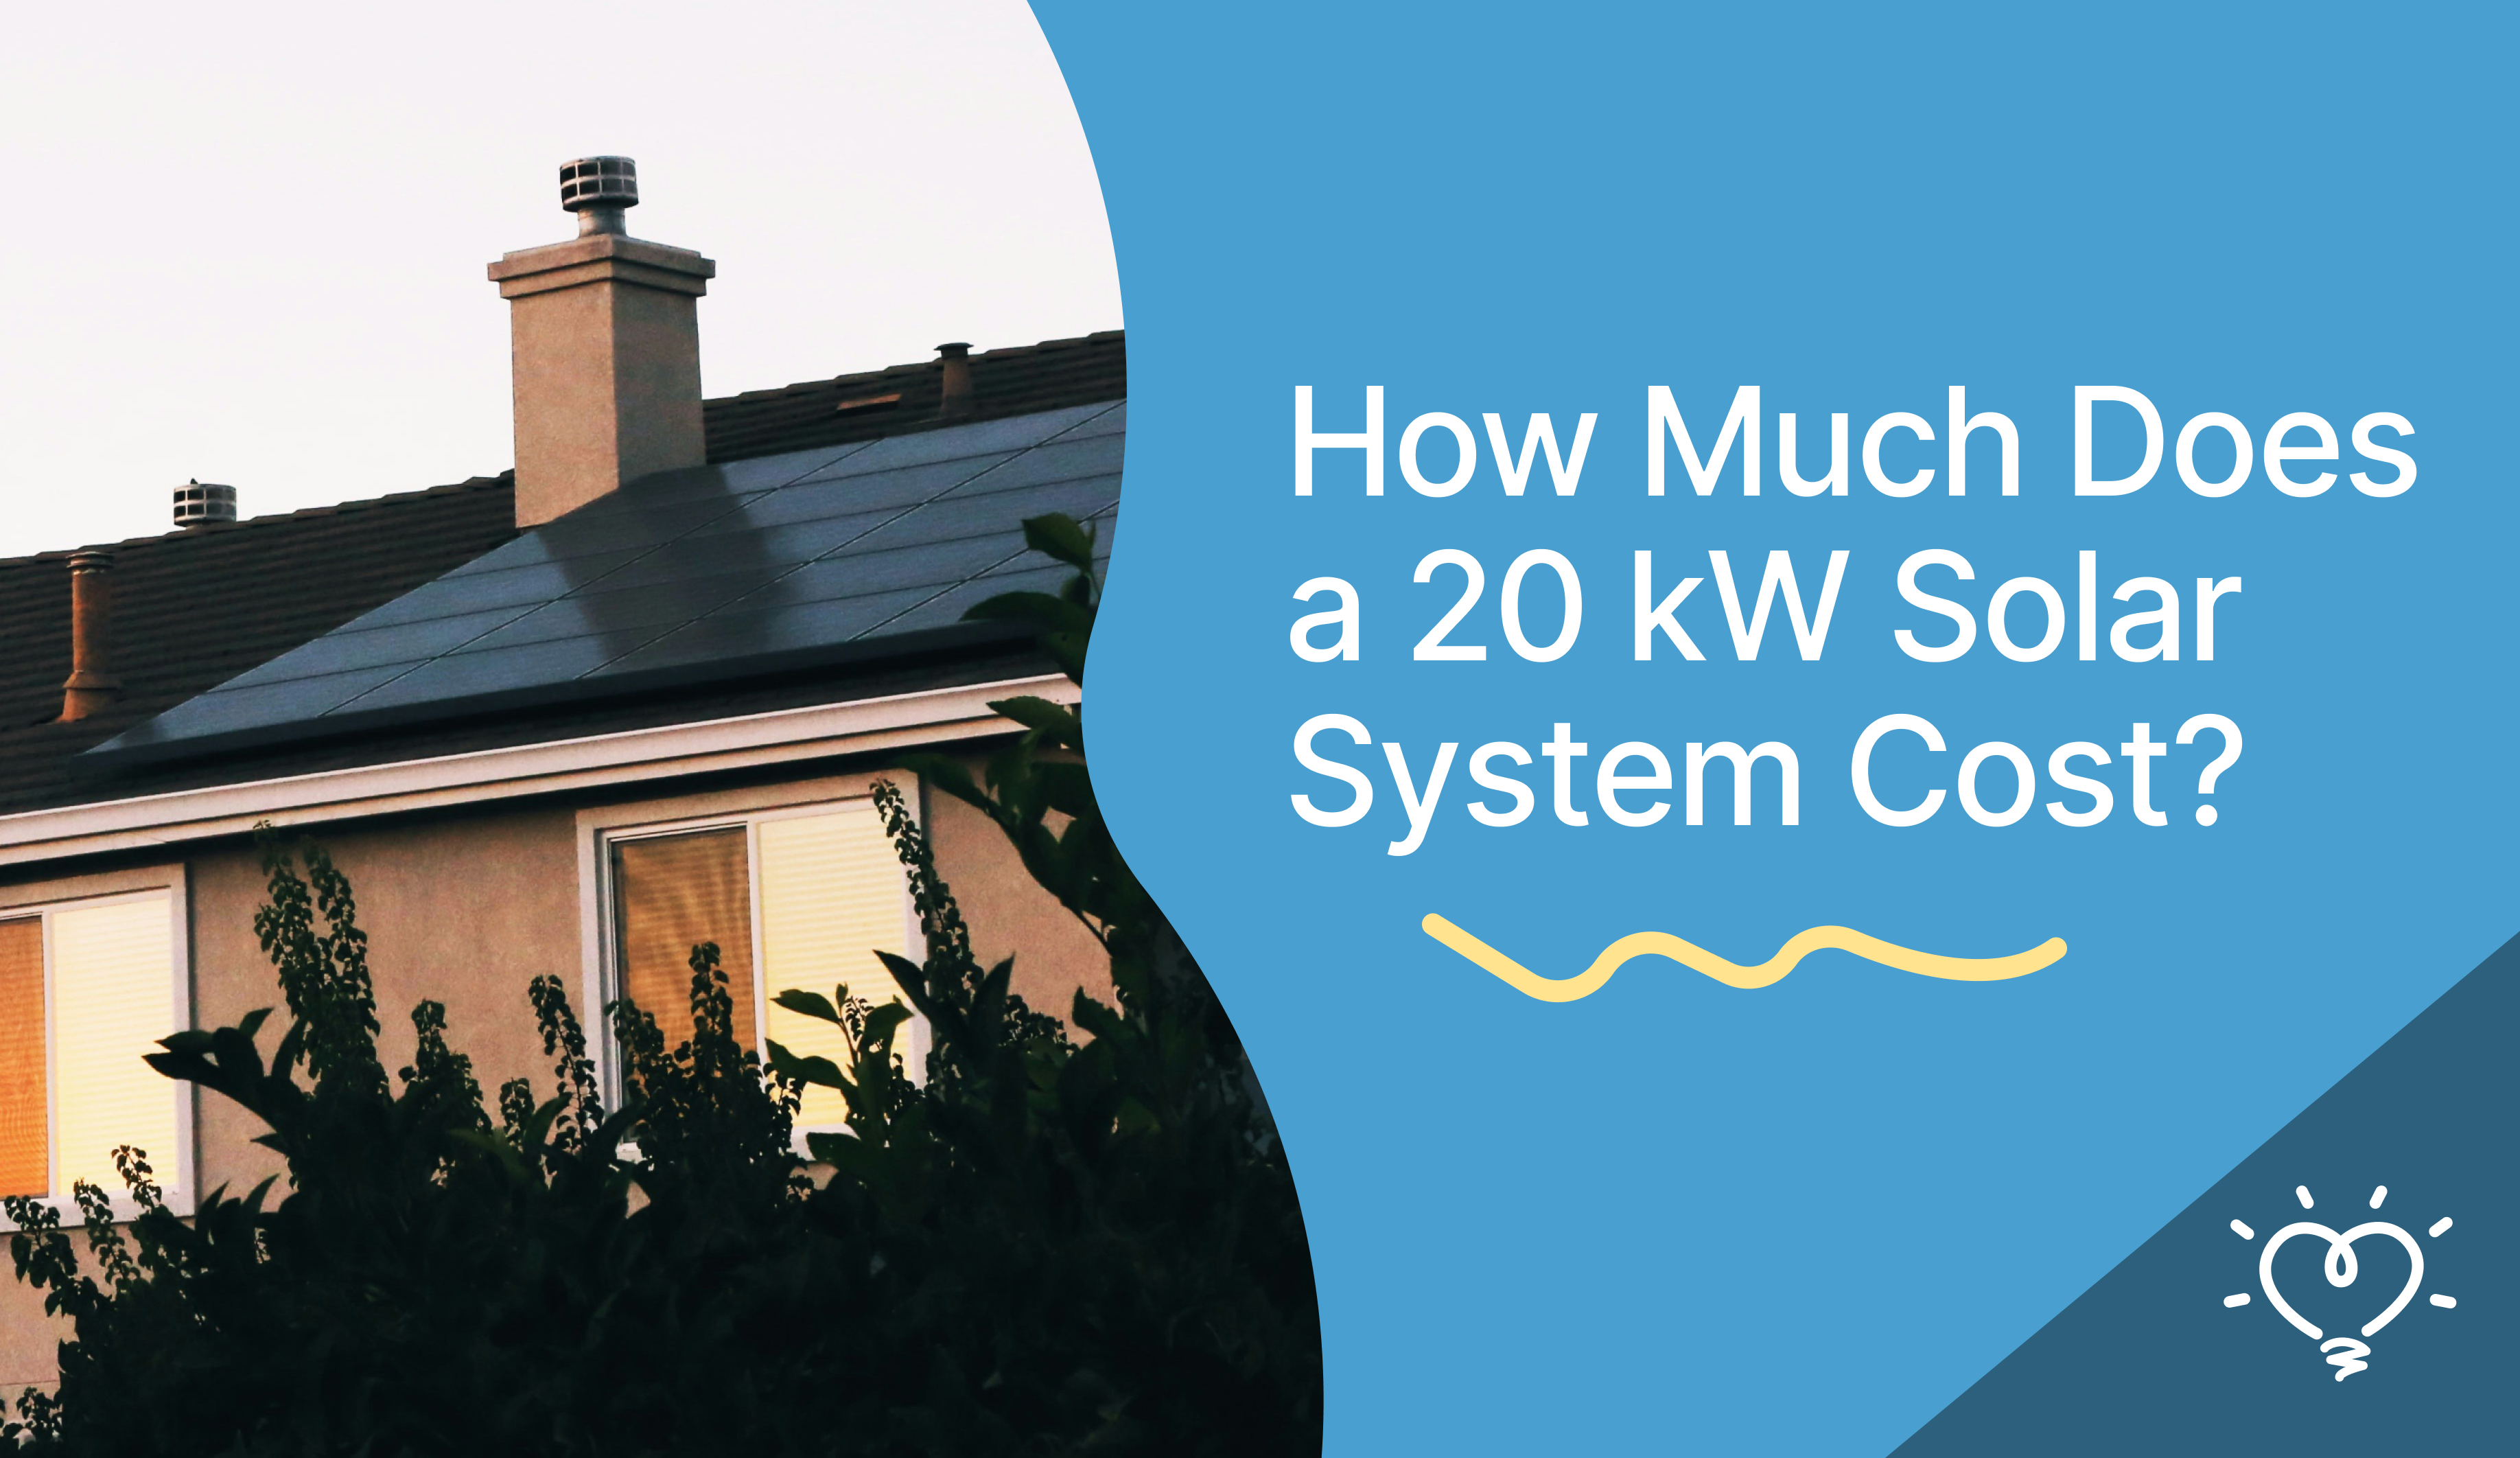 How Much Does a 20 kW Solar System Cost?